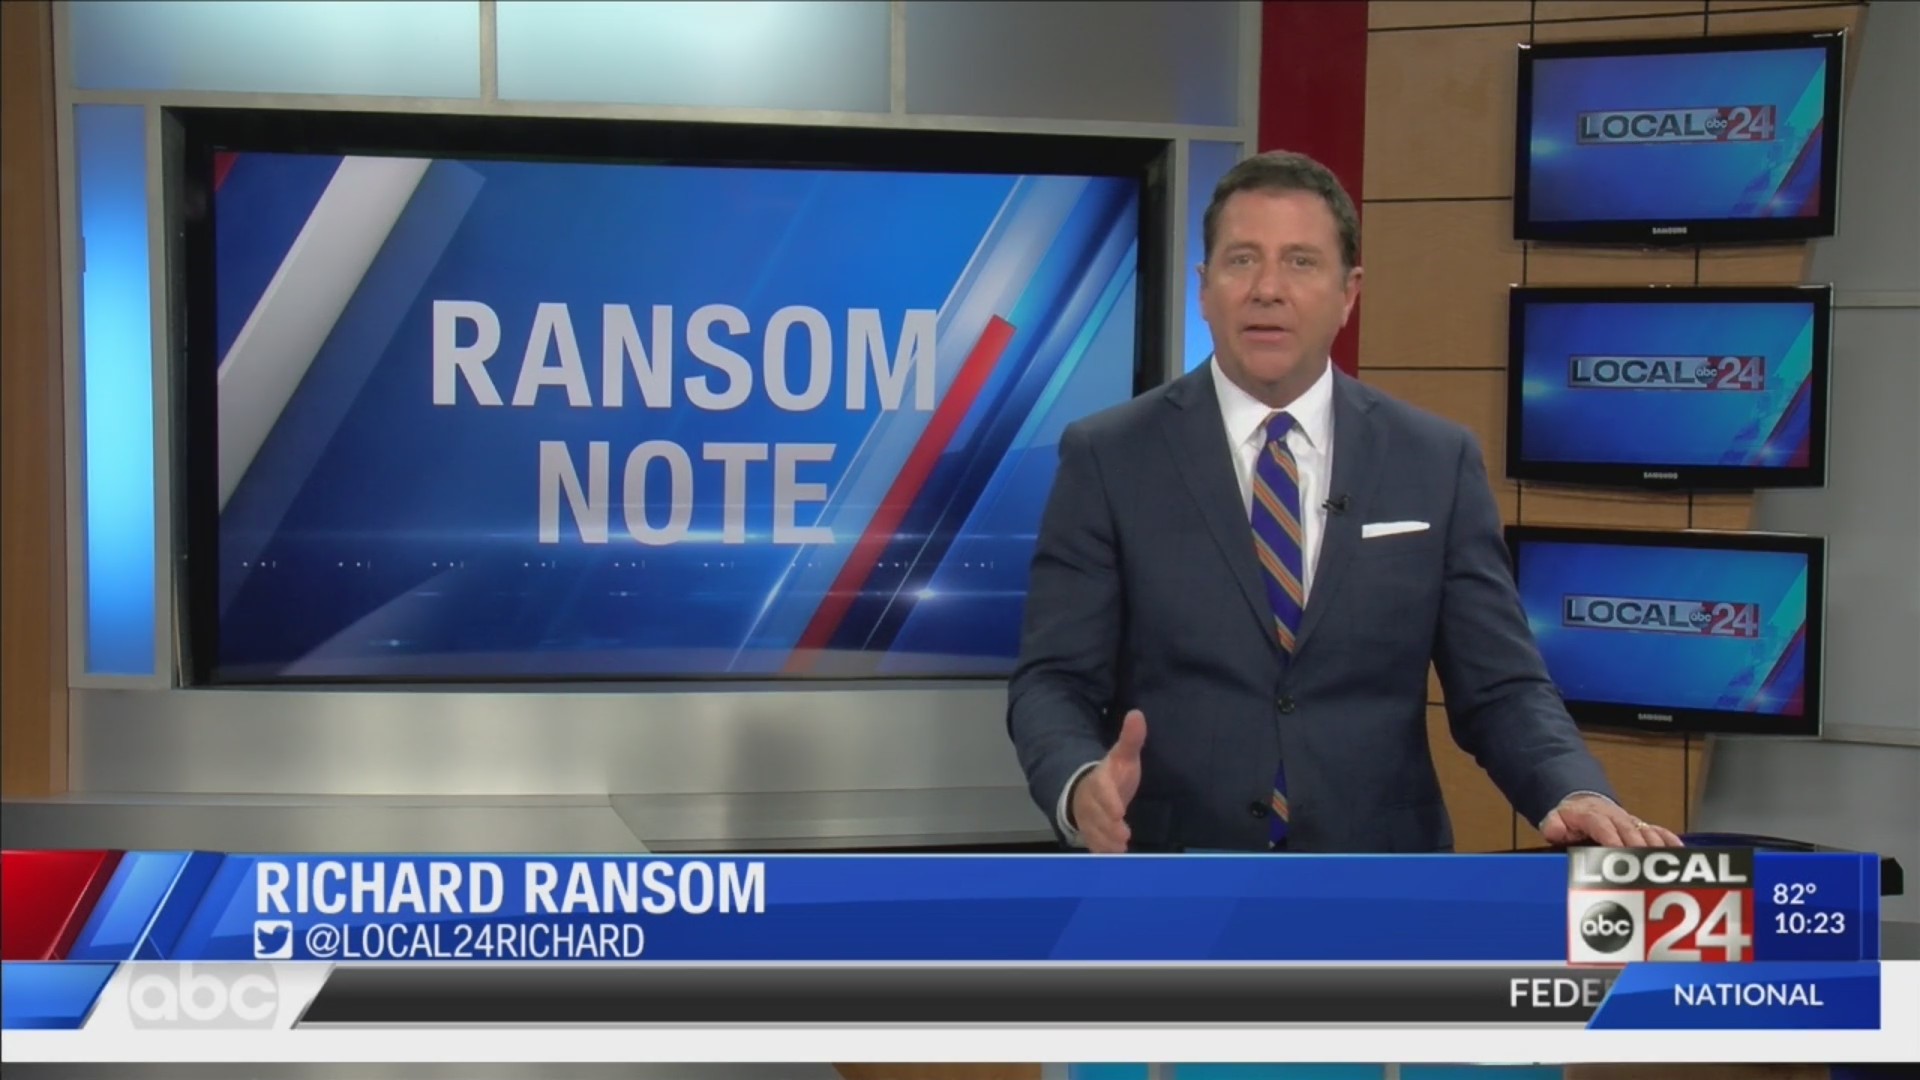 "Ransom Note": Local 24 News' Richard Ransom looks at American pride